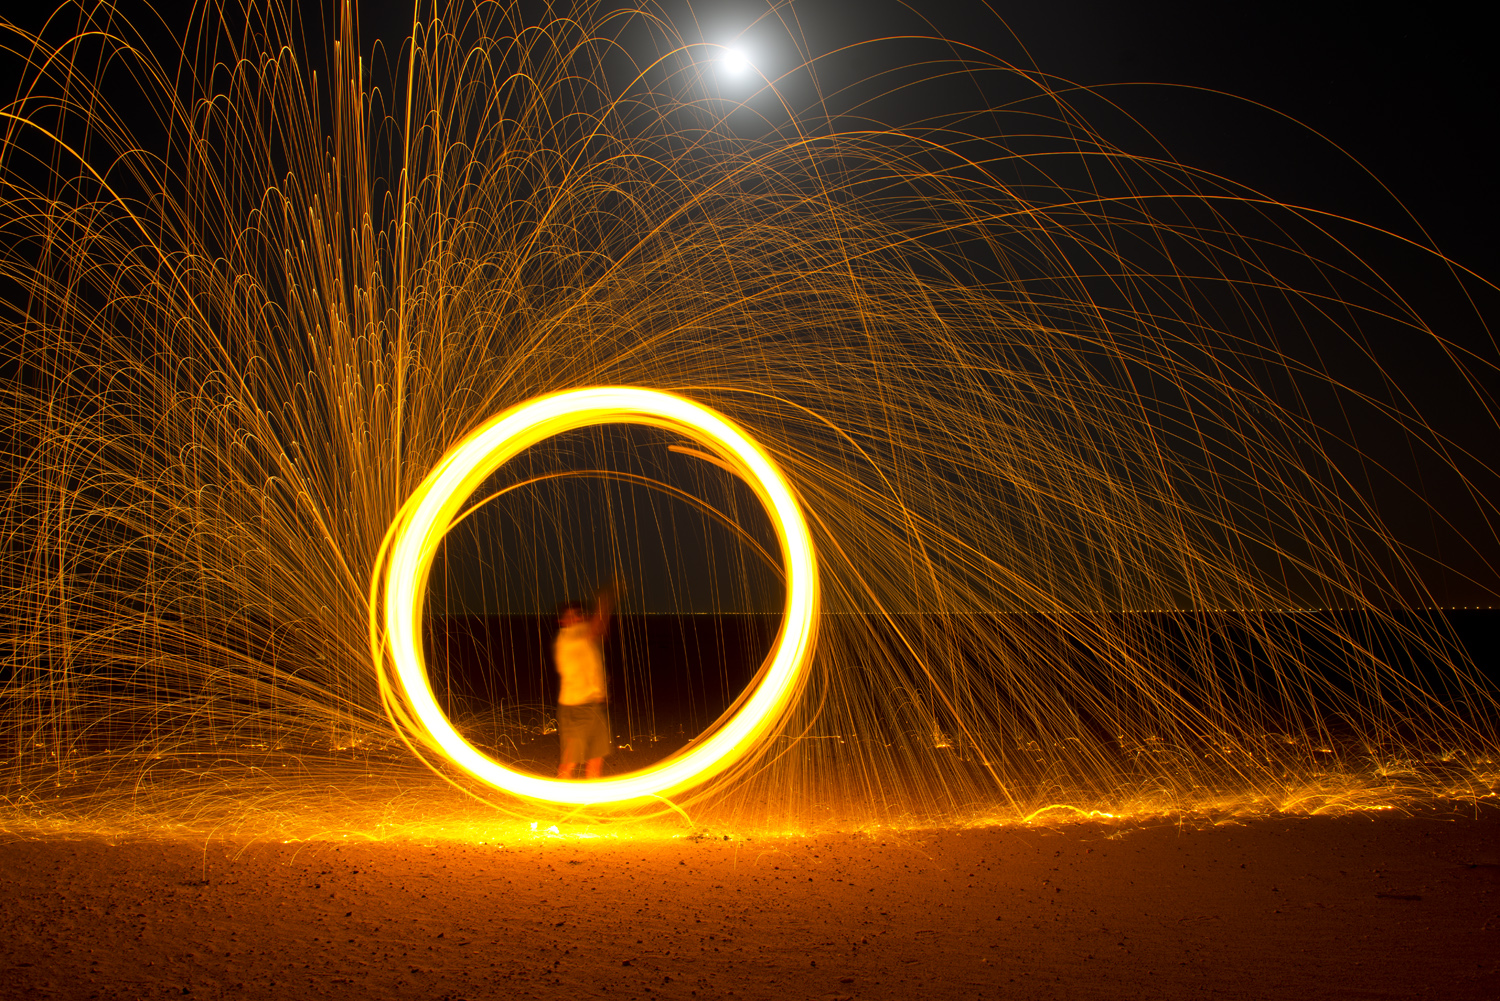 Digitally Exposed Light Painting with Steel Wool